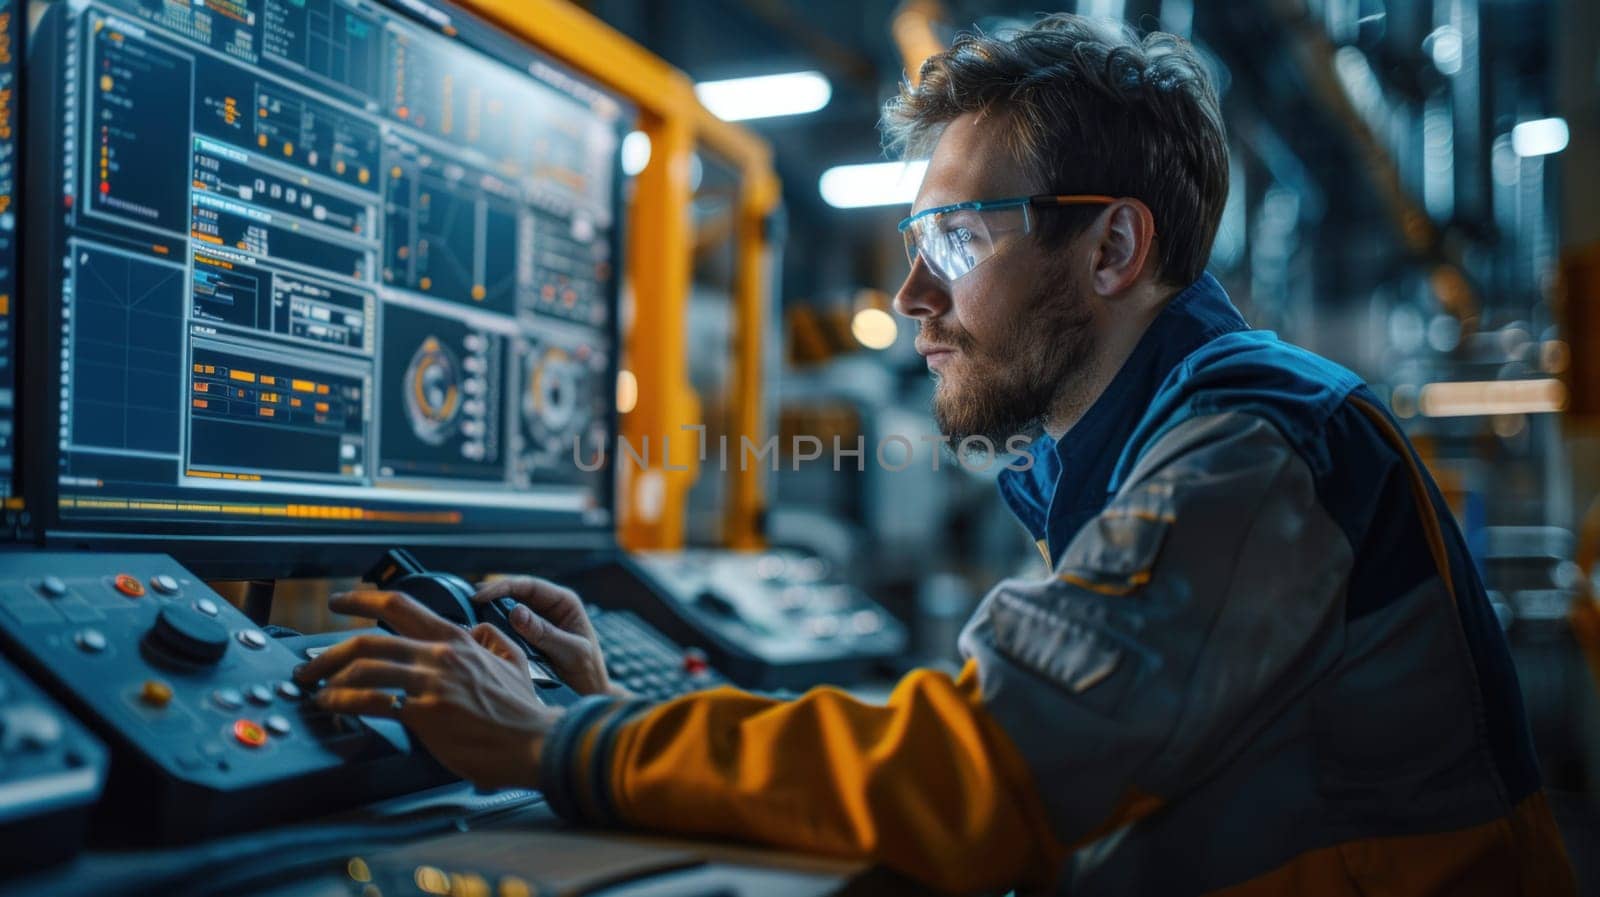 A man is diligently working on a computer in a bustling factory setting, surrounded by machinery and equipment.